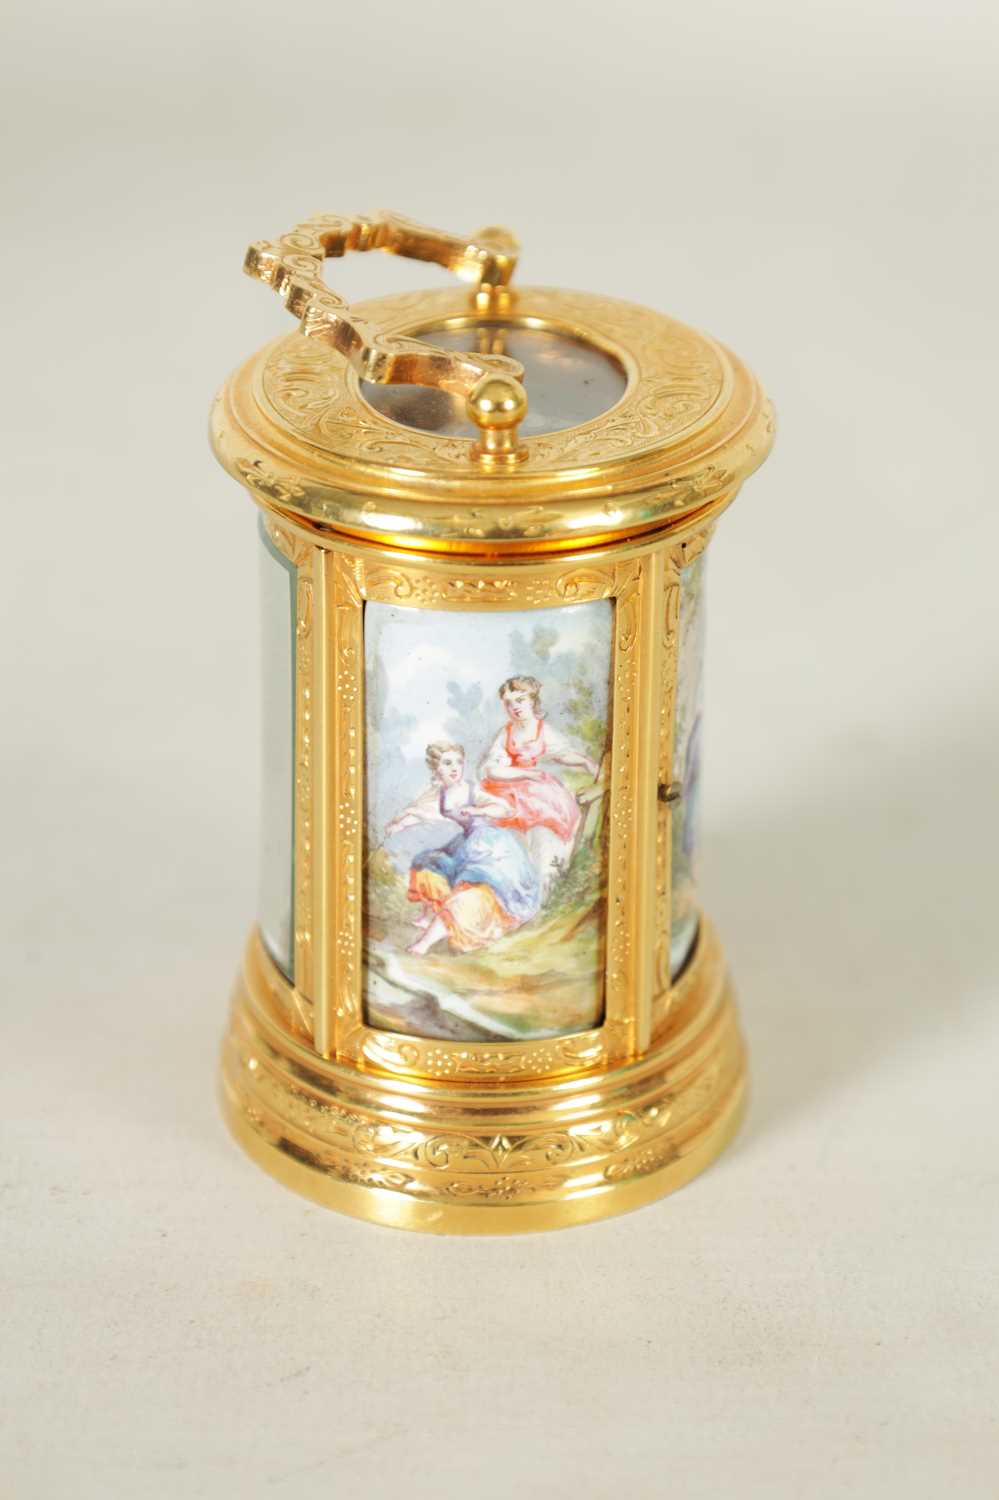 A LATE 19TH CENTURY MINIATURE PORCELAIN PANELLED ENGRAVED OVAL CARRIAGE CLOCK - Image 5 of 8